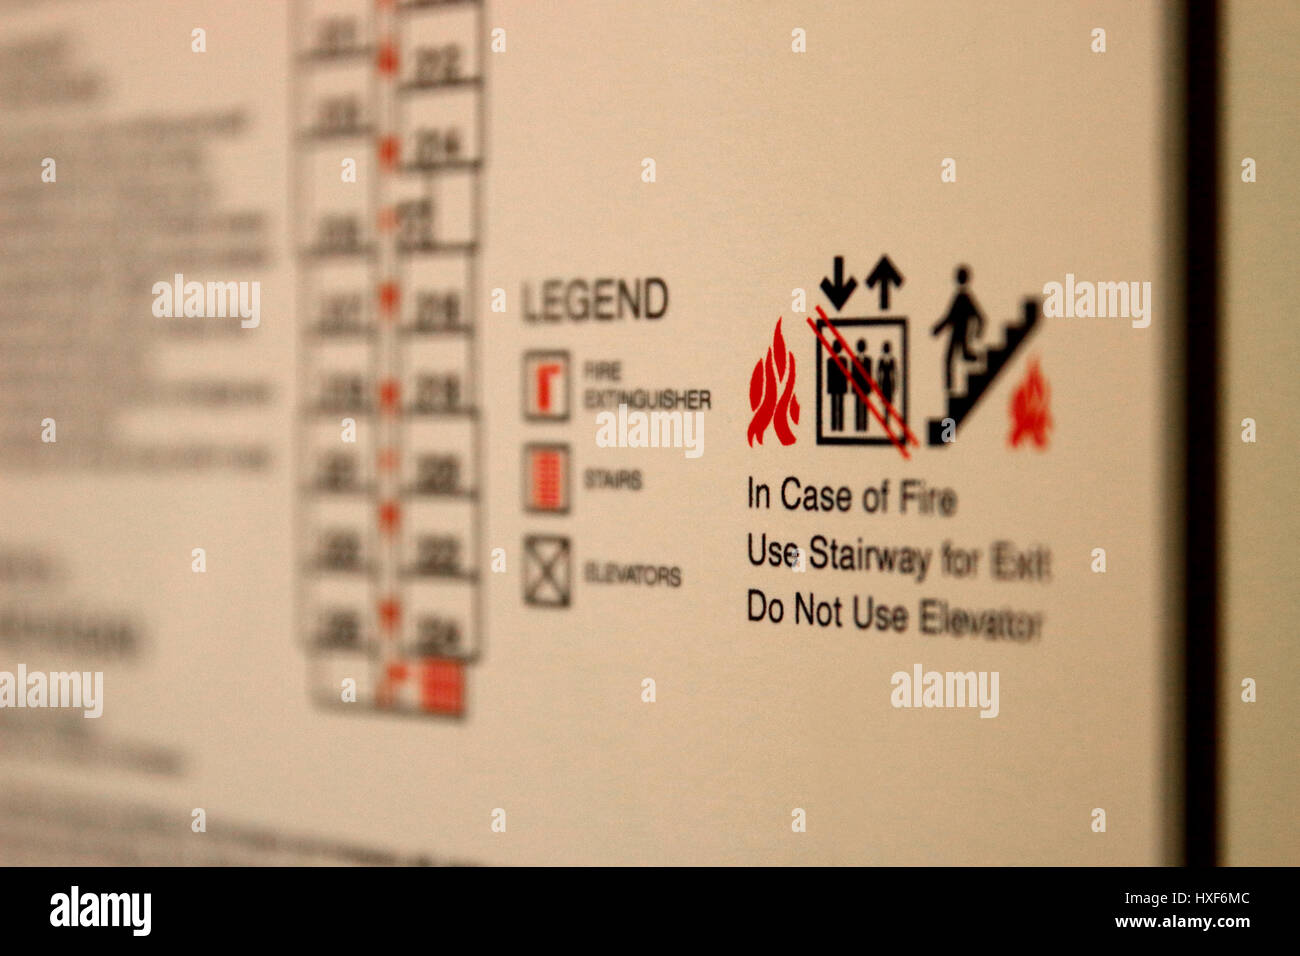 Fire Escape Route placque in a hotel room. In case of Fire Use Stairway for Exit. Do Not Use Elevator Stock Photo